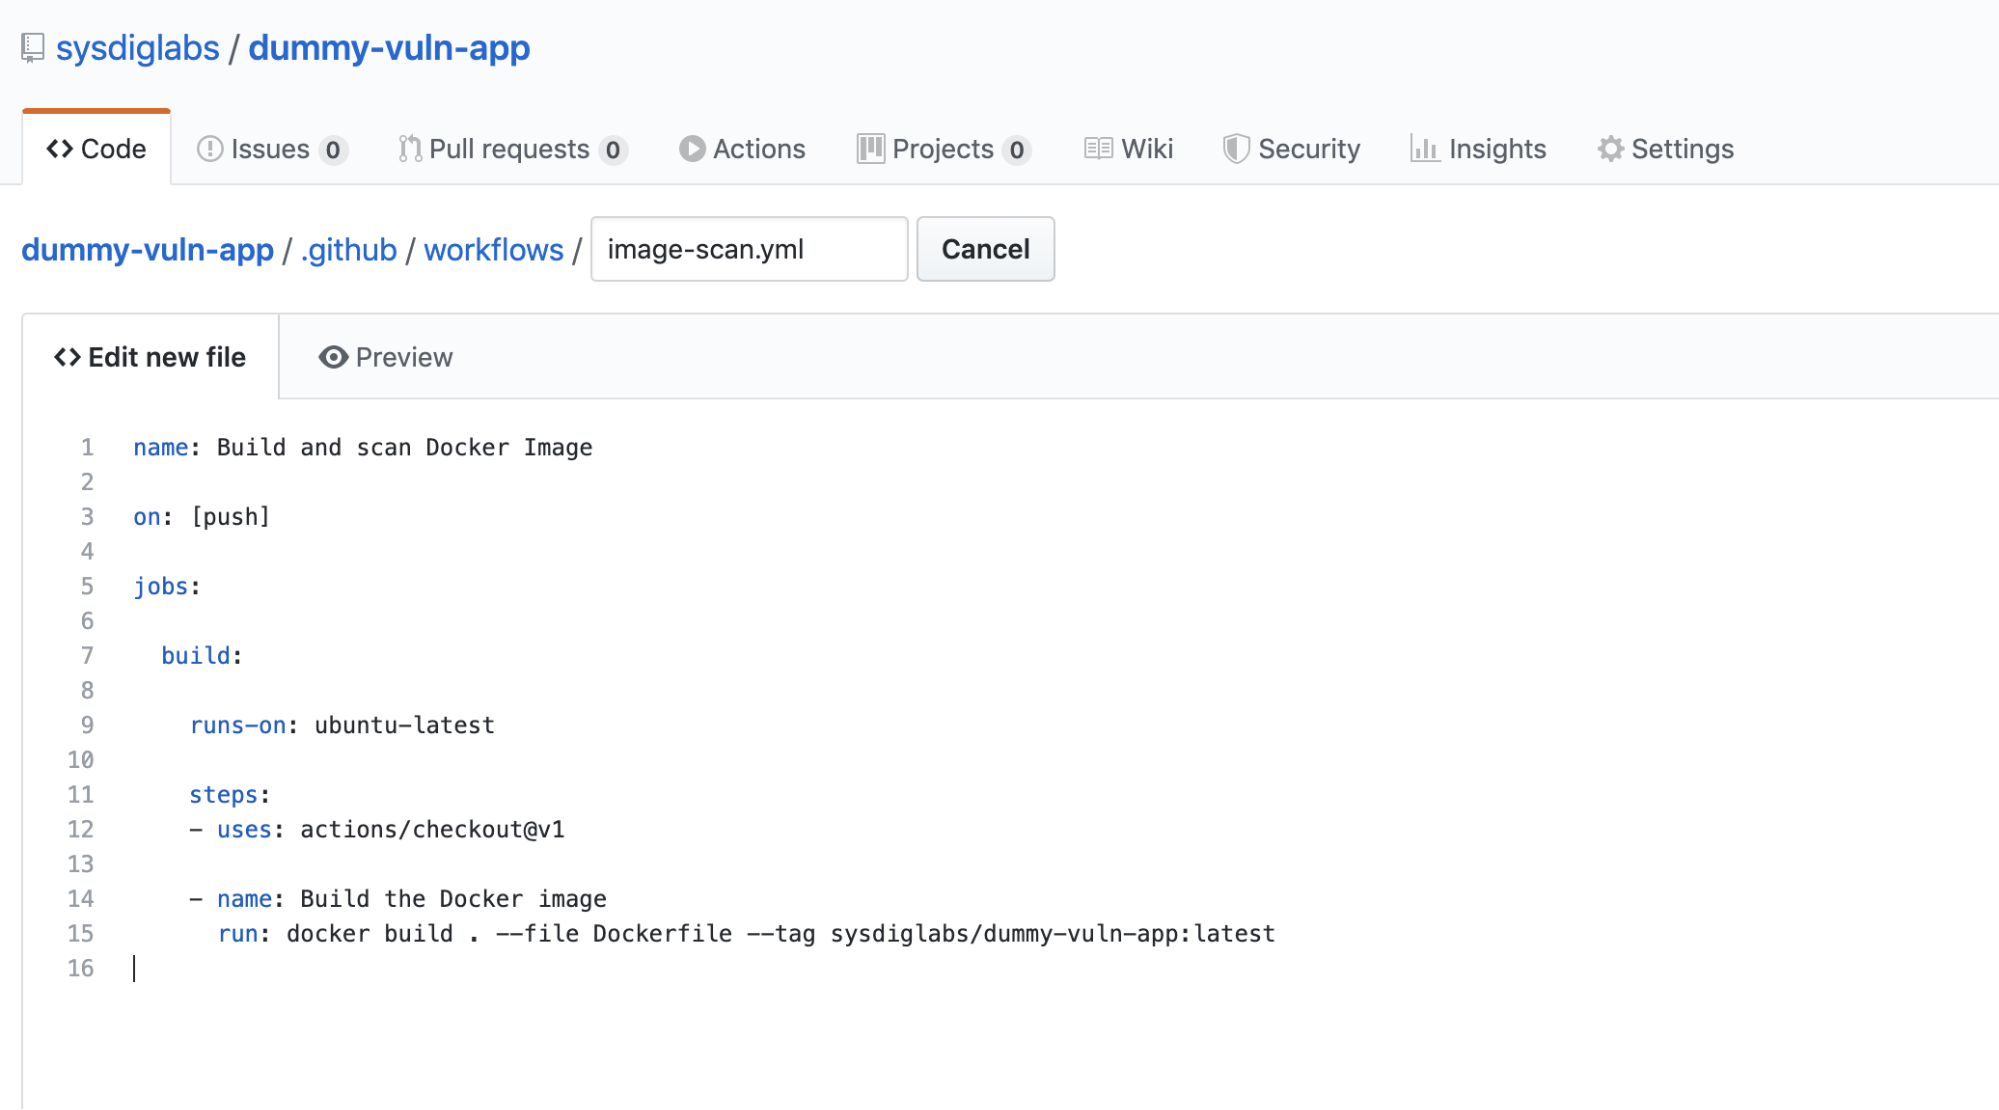 The workflow definition to perform image scanning with GitHub Actions